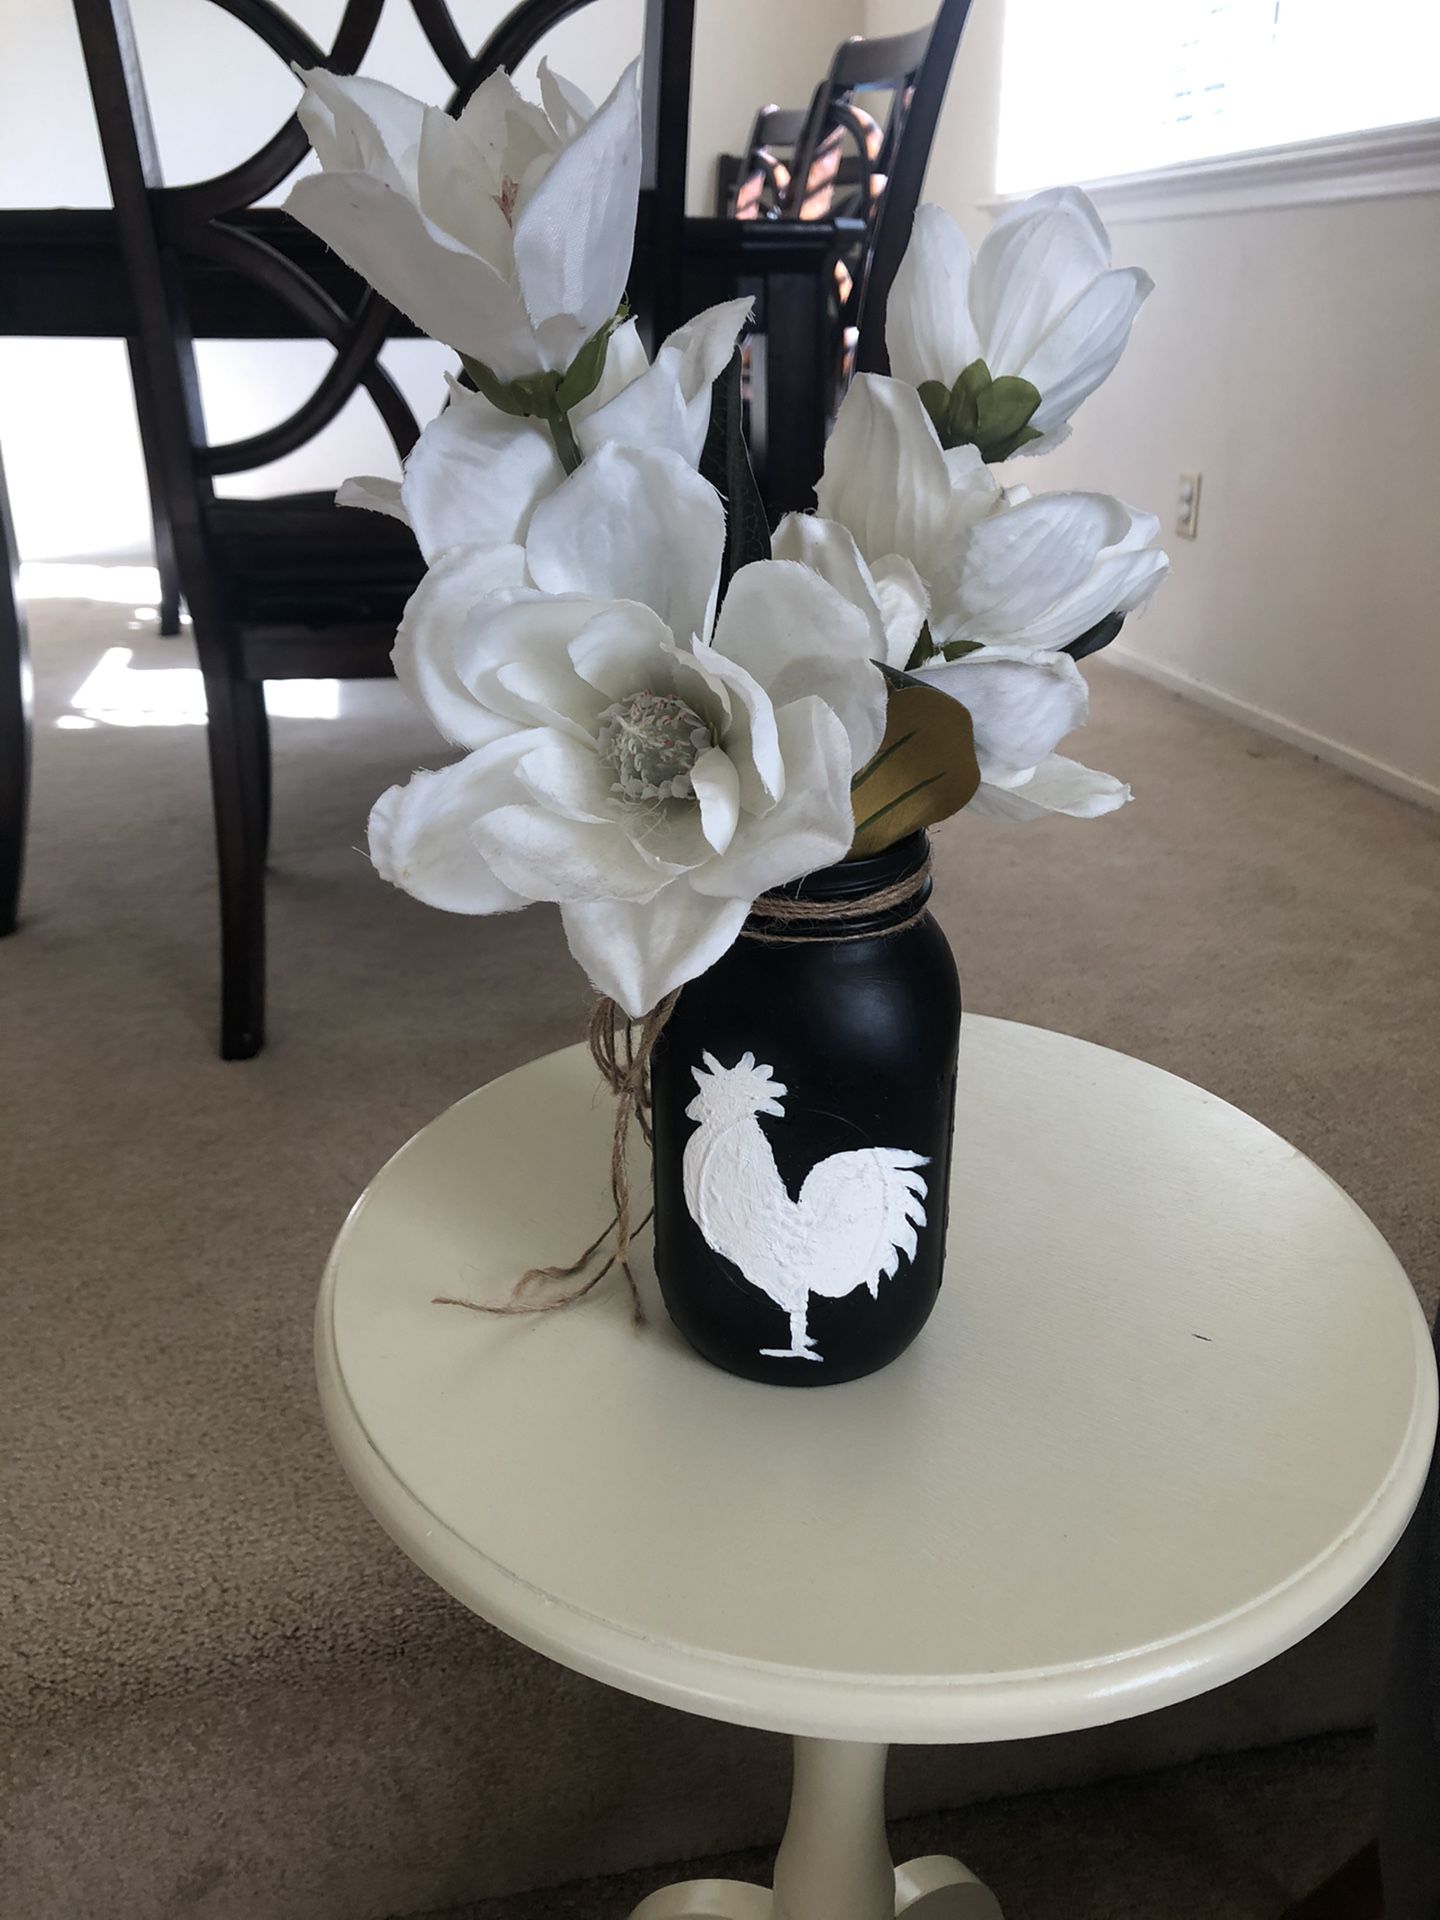 Rooster Mason Jar with Flowers - $5